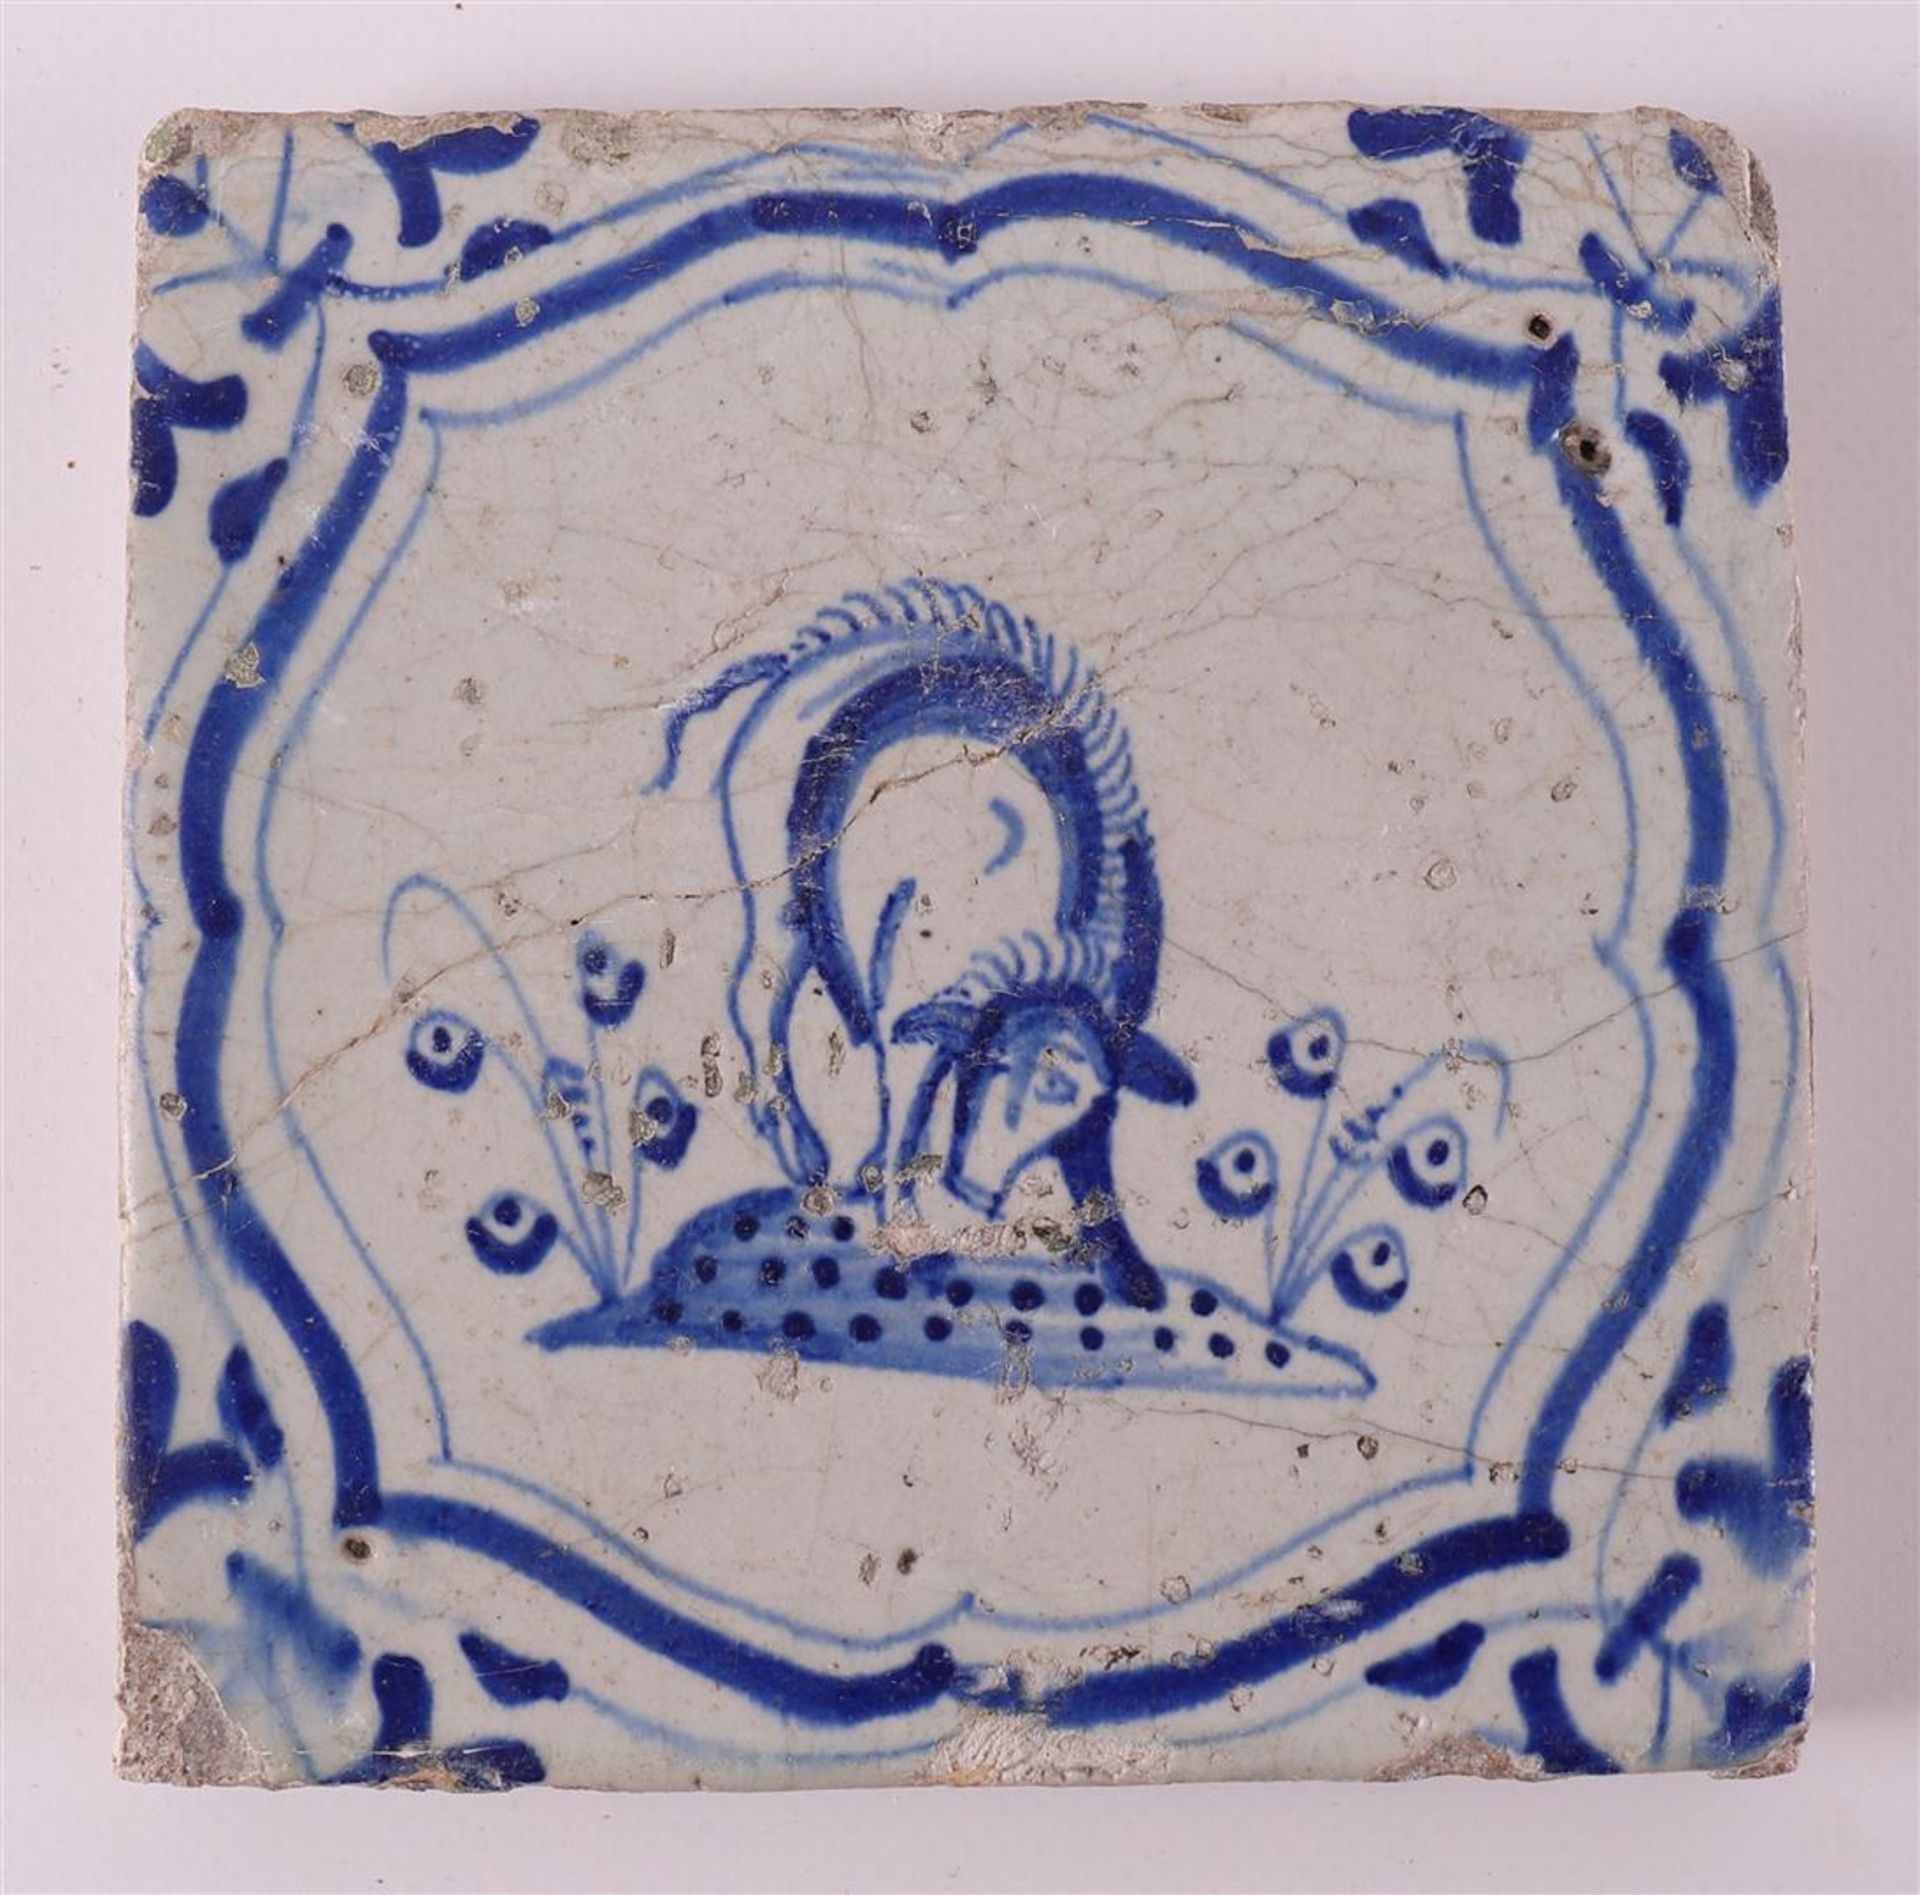 A blue/white tile with a decor of putti on a dolphin, Holland, 17th century - Image 3 of 6